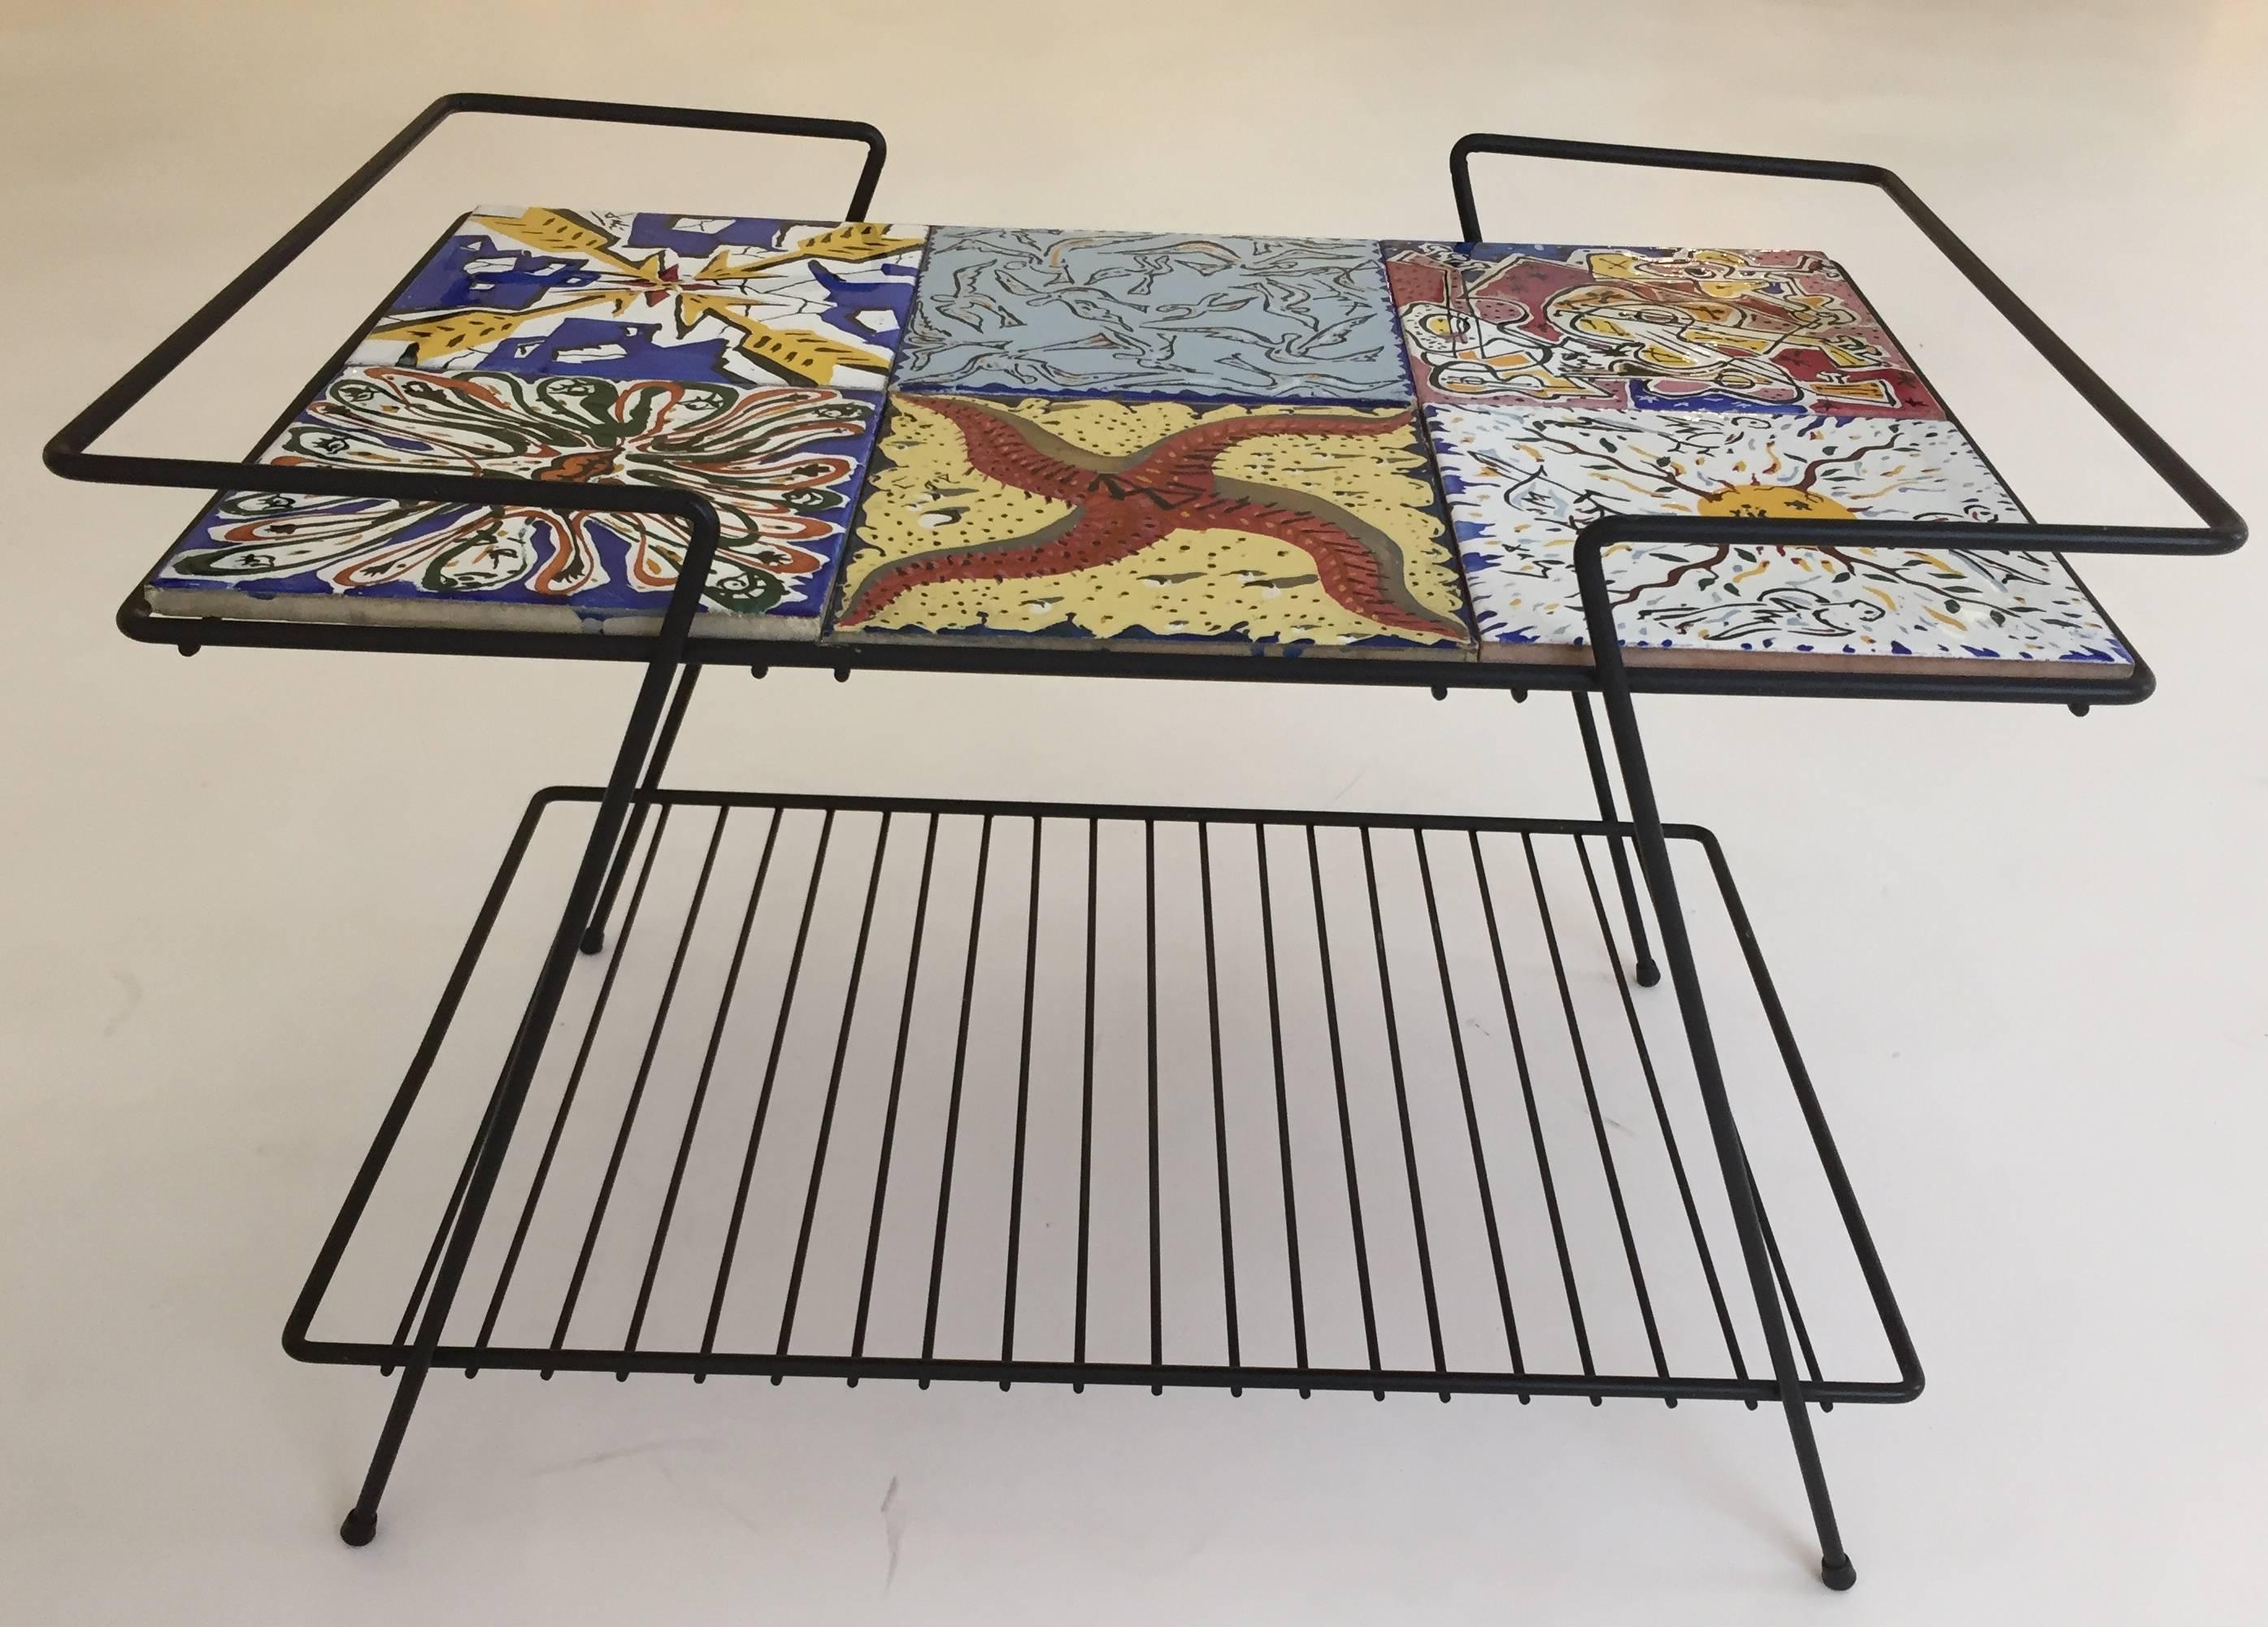 French art collector Maurice Duchin commissioned Dali to design six decorative tiles in 1953. 800 hand-painted sets were produced, all hand signed by Dali. Of these, 100 sets were reserved to be sold as table-tops on painted iron frames. We have a